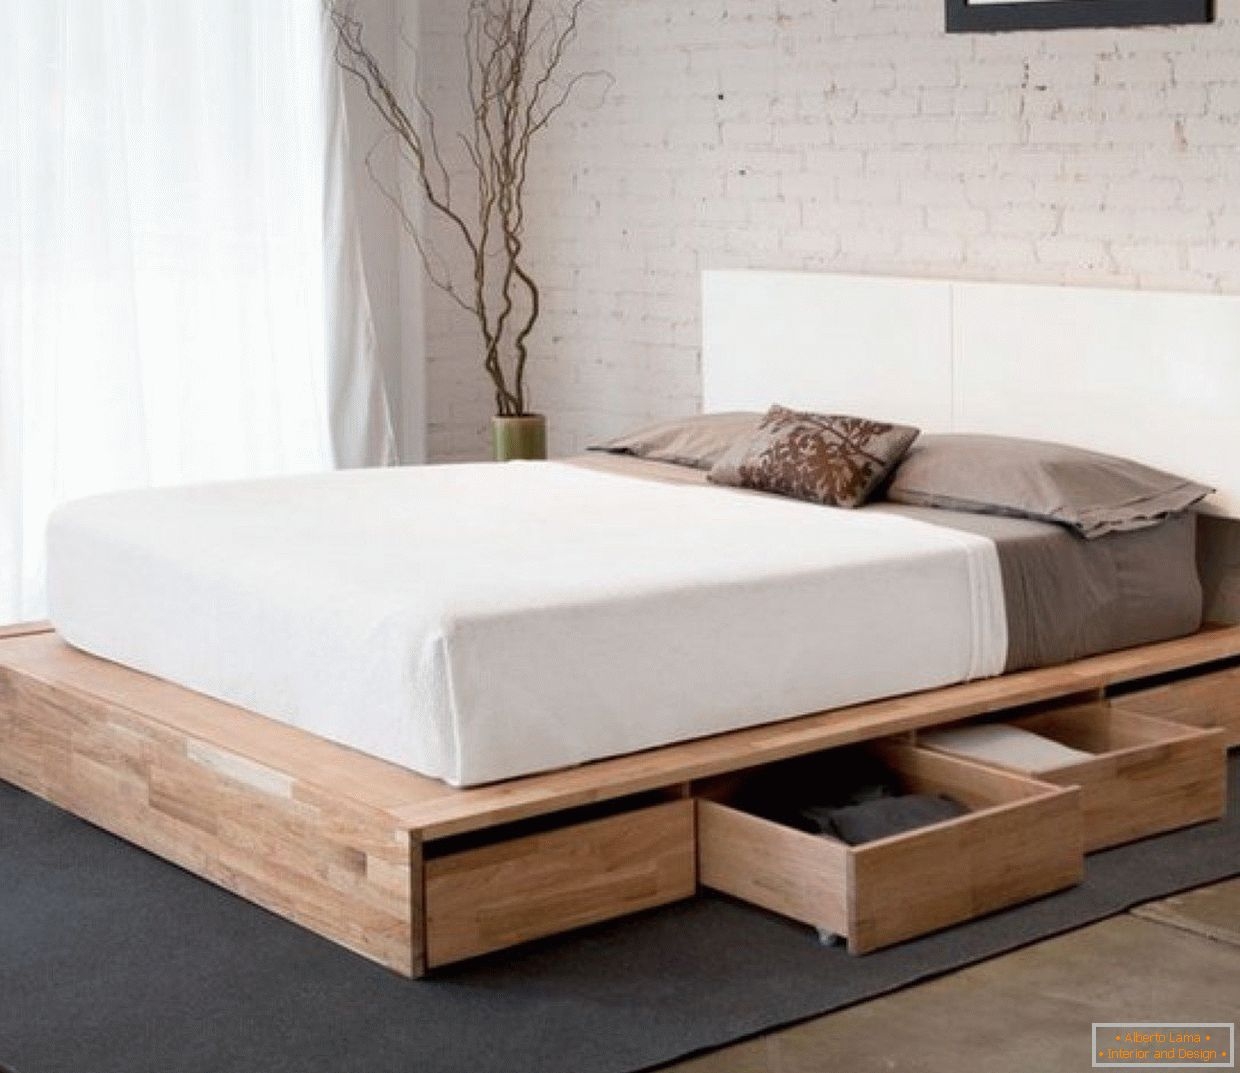 Bed With Drawers Underneath Visualhunt, California King Size Bed Frame With Storage